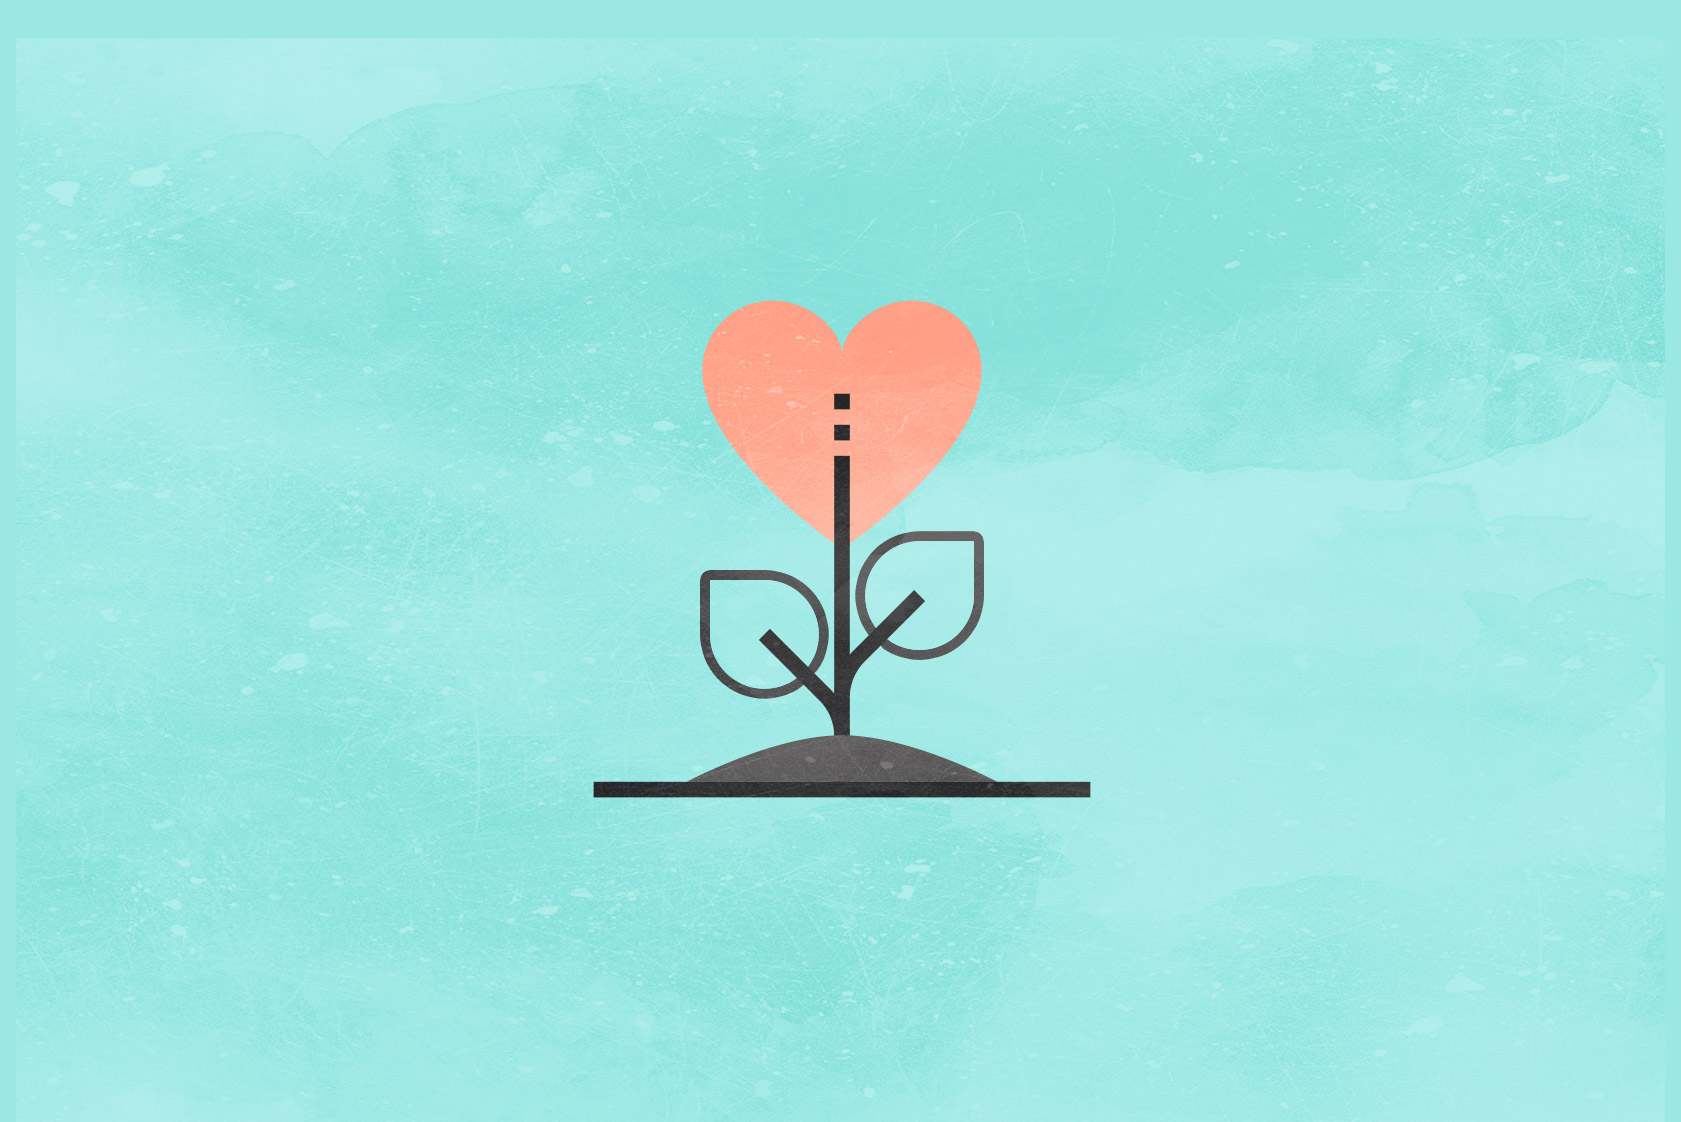 An illustration of a heart-shaped plant